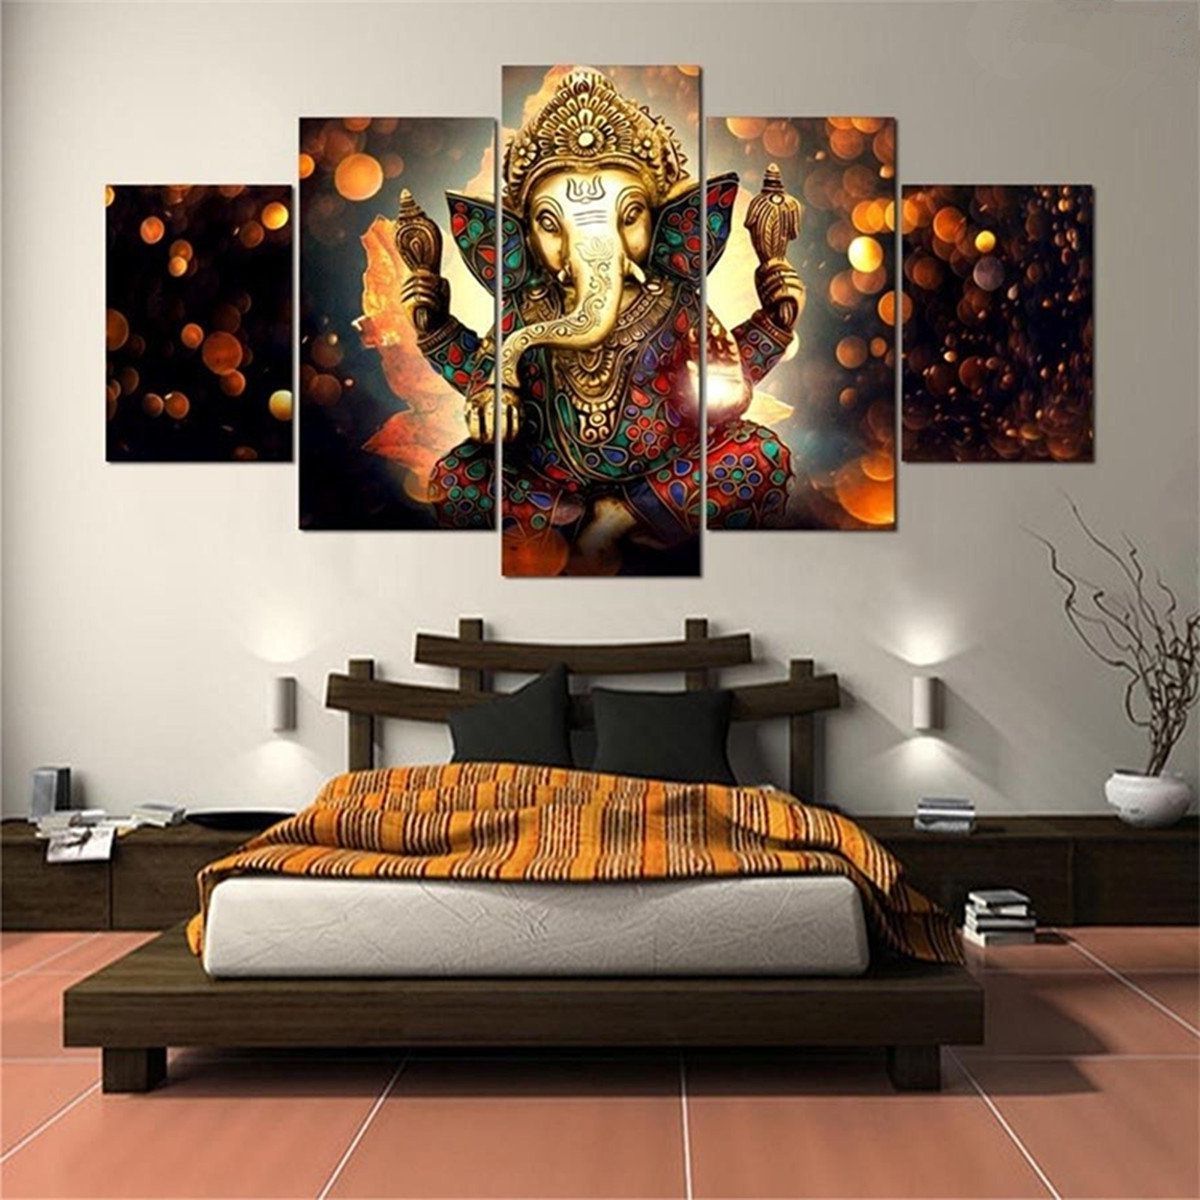 Abstract Wall Art Posters In Most Recent 5pcs Ganesha Painting Abstract Print Modern Canvas Wall Art Poster (View 9 of 15)